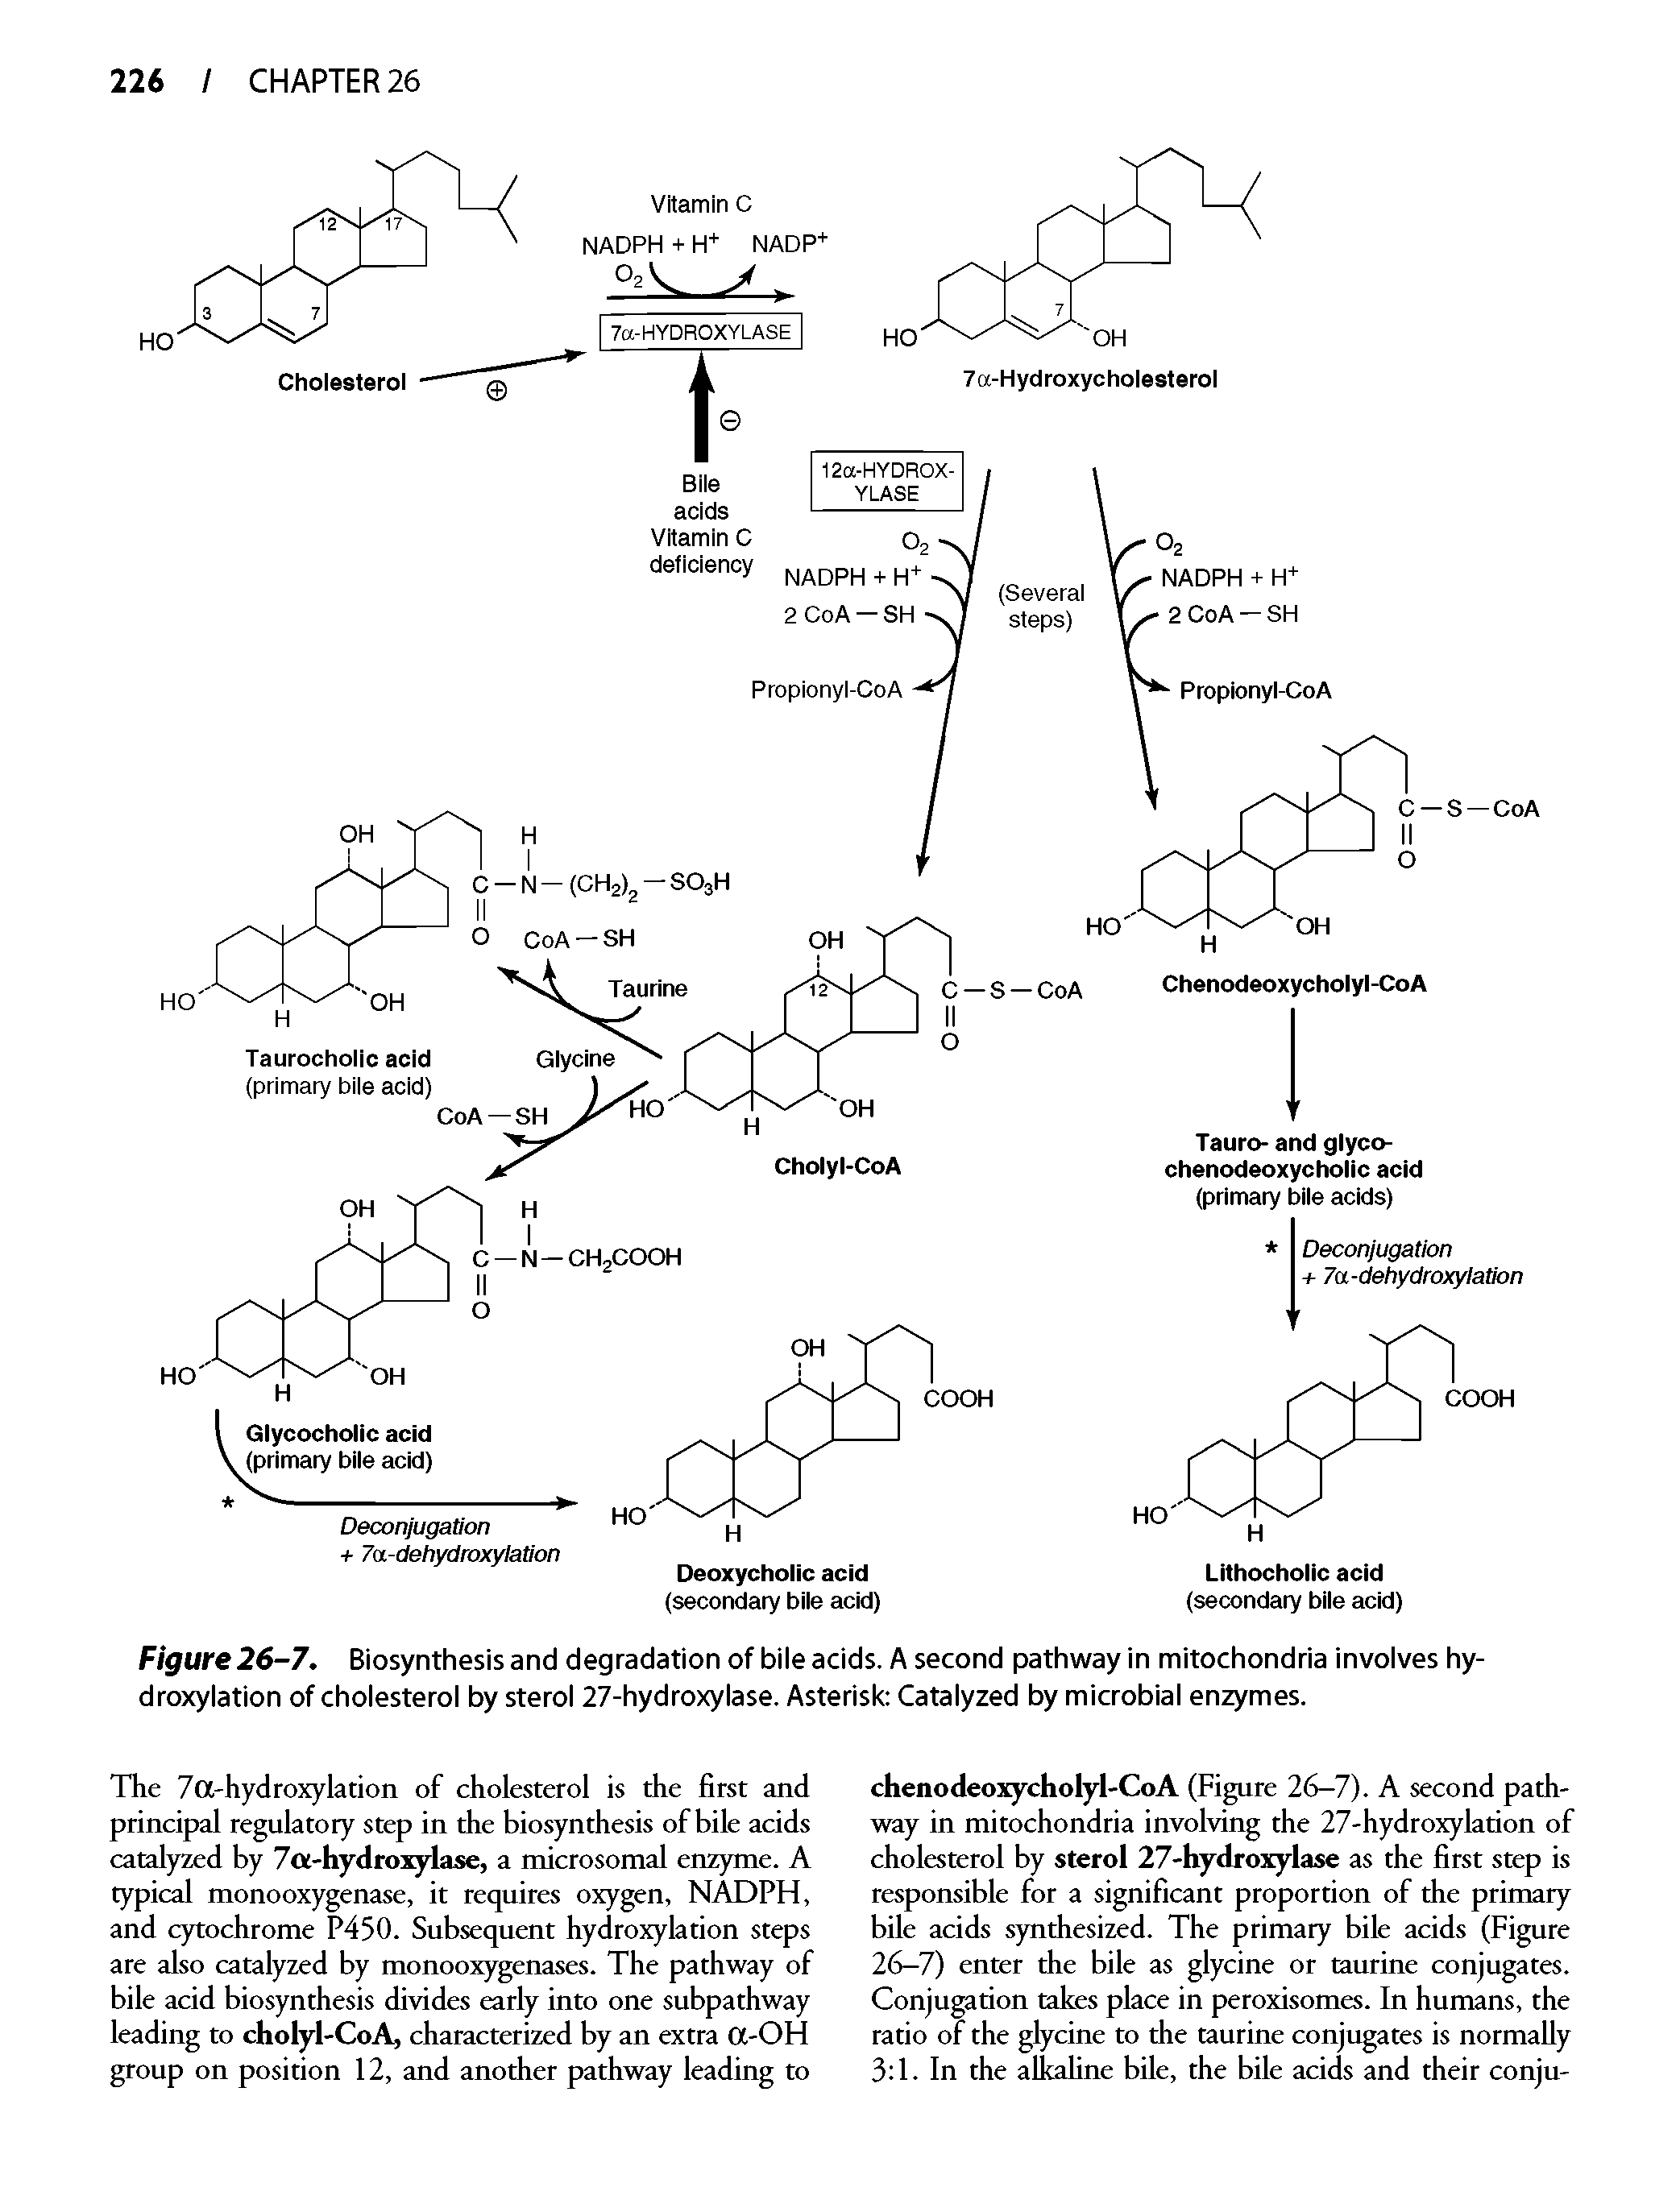 Figure 26-7. Biosynthesis and degradation of bile acids. A second pathway in mitochondria involves hy-droxylation of cholesterol by sterol 27-hydroxylase. Asterisk Catalyzed by microbial enzymes.